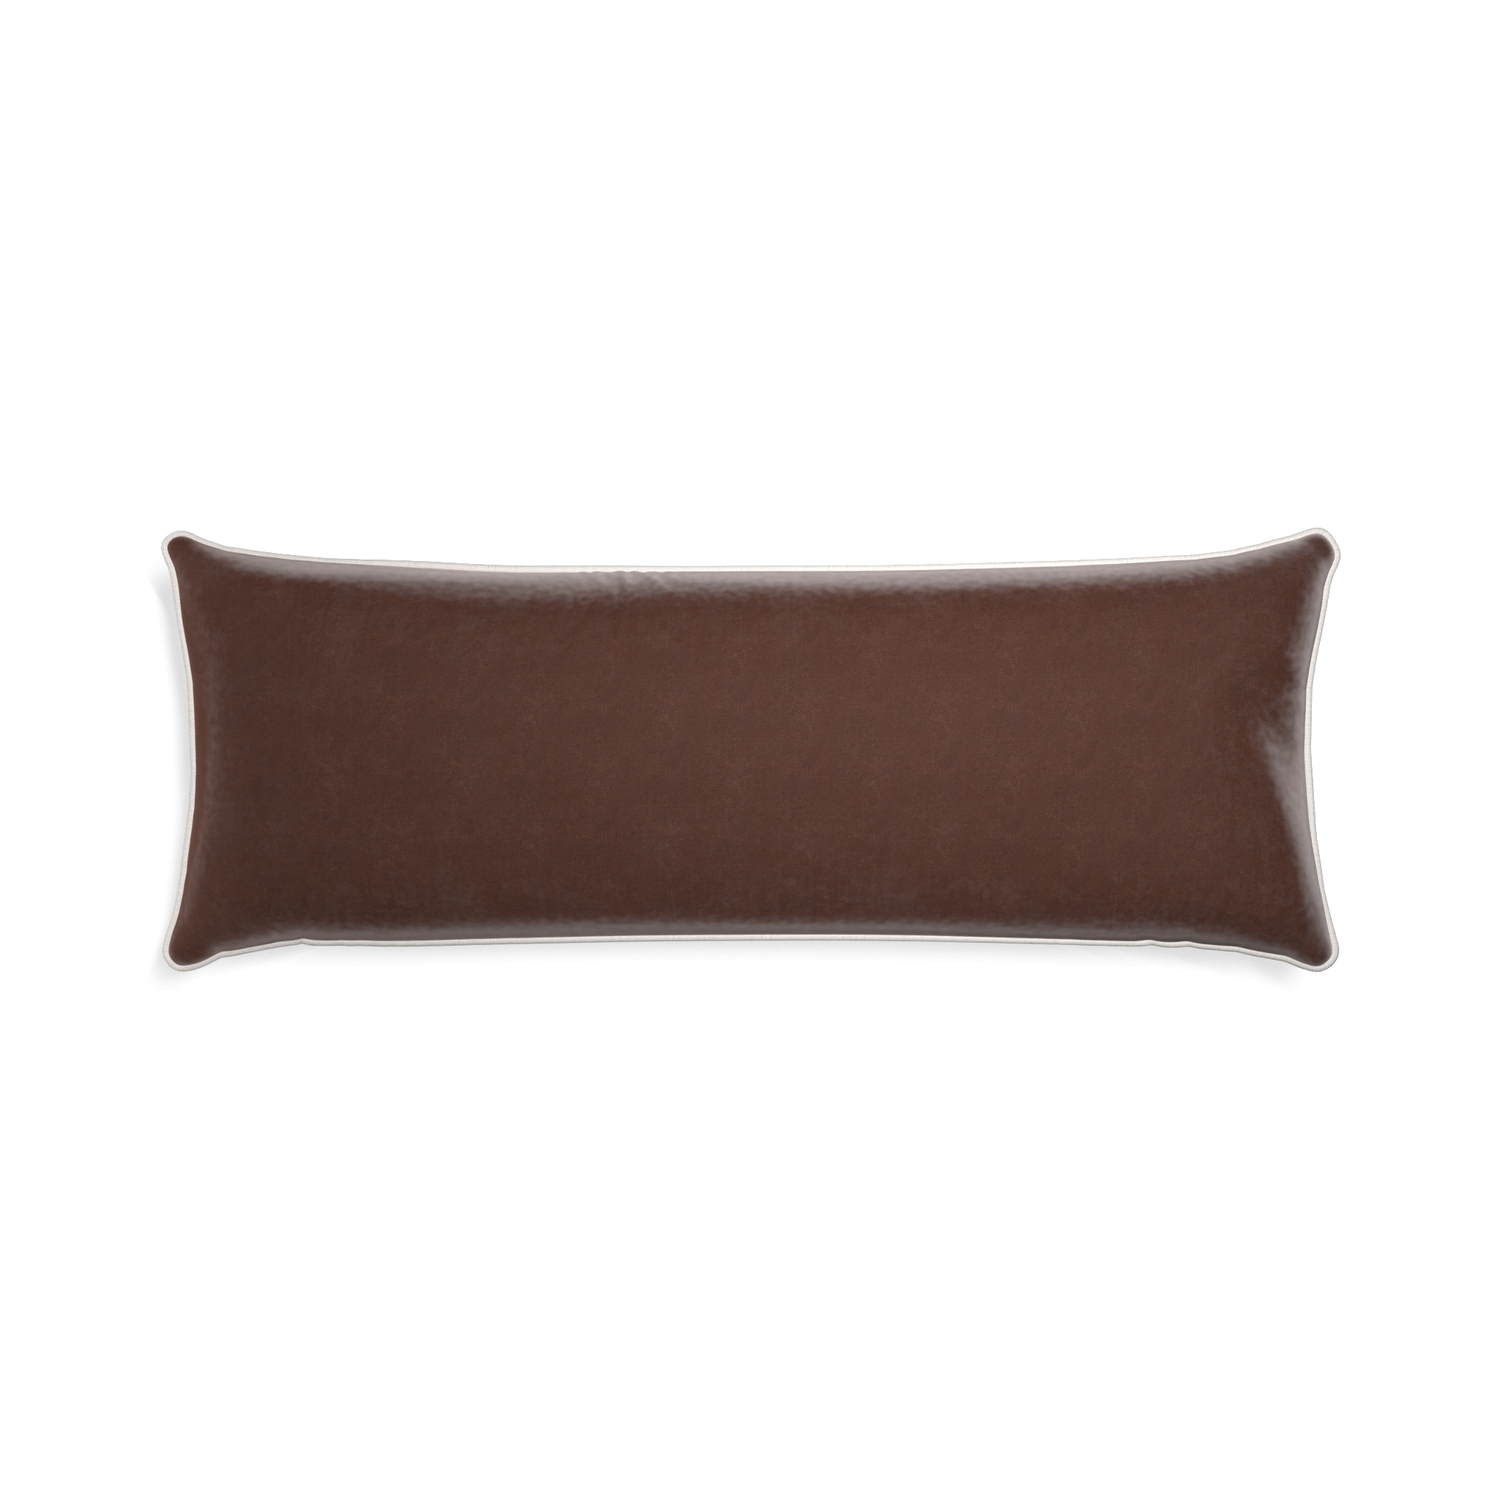 rectangle brown velvet pillow with white piping